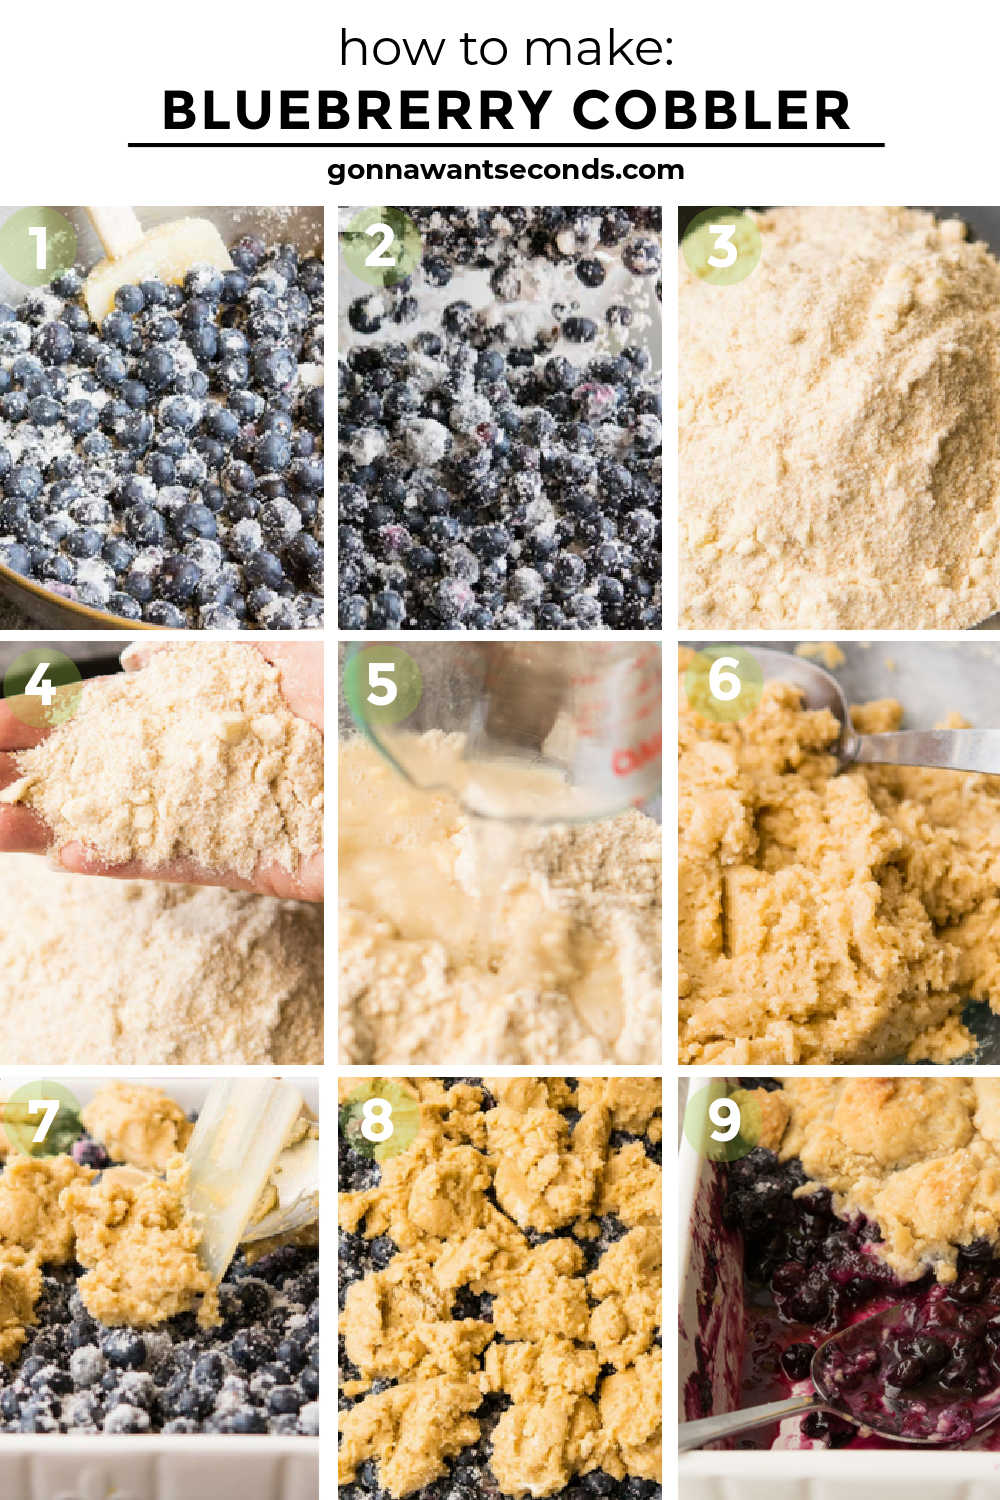 Step by step how to make blueberry cobbler